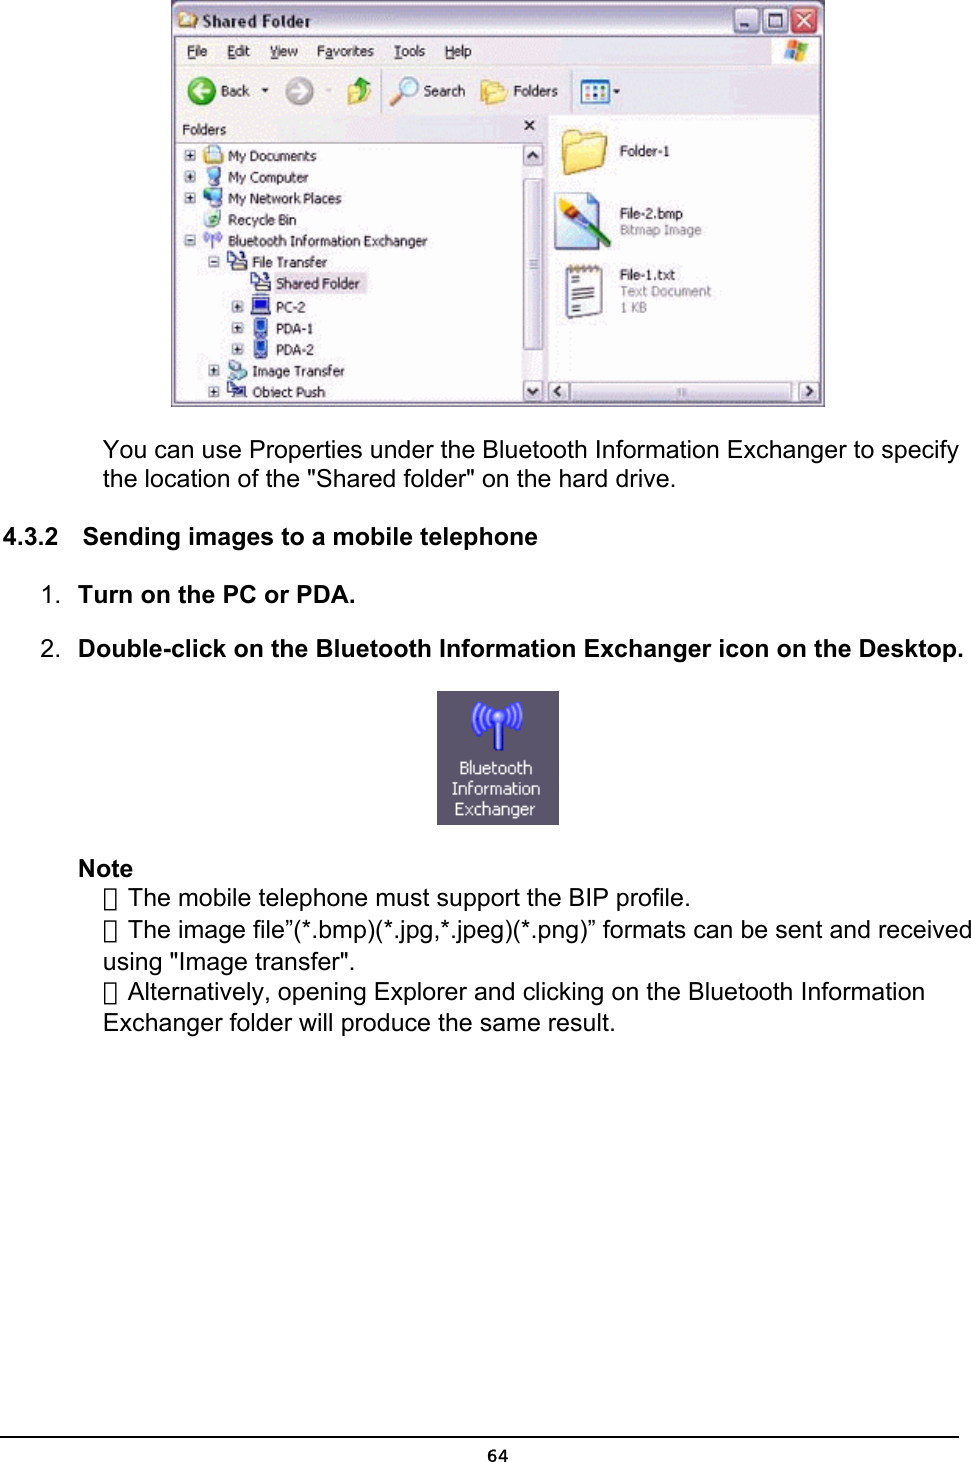   You can use Properties under the Bluetooth Information Exchanger to specify the location of the &quot;Shared folder&quot; on the hard drive.   4.3.2  Sending images to a mobile telephone    1.  Turn on the PC or PDA. 2.  Double-click on the Bluetooth Information Exchanger icon on the Desktop.  Note ．The mobile telephone must support the BIP profile. ．The image file”(*.bmp)(*.jpg,*.jpeg)(*.png)” formats can be sent and received using &quot;Image transfer&quot;. ．Alternatively, opening Explorer and clicking on the Bluetooth Information Exchanger folder will produce the same result.  64